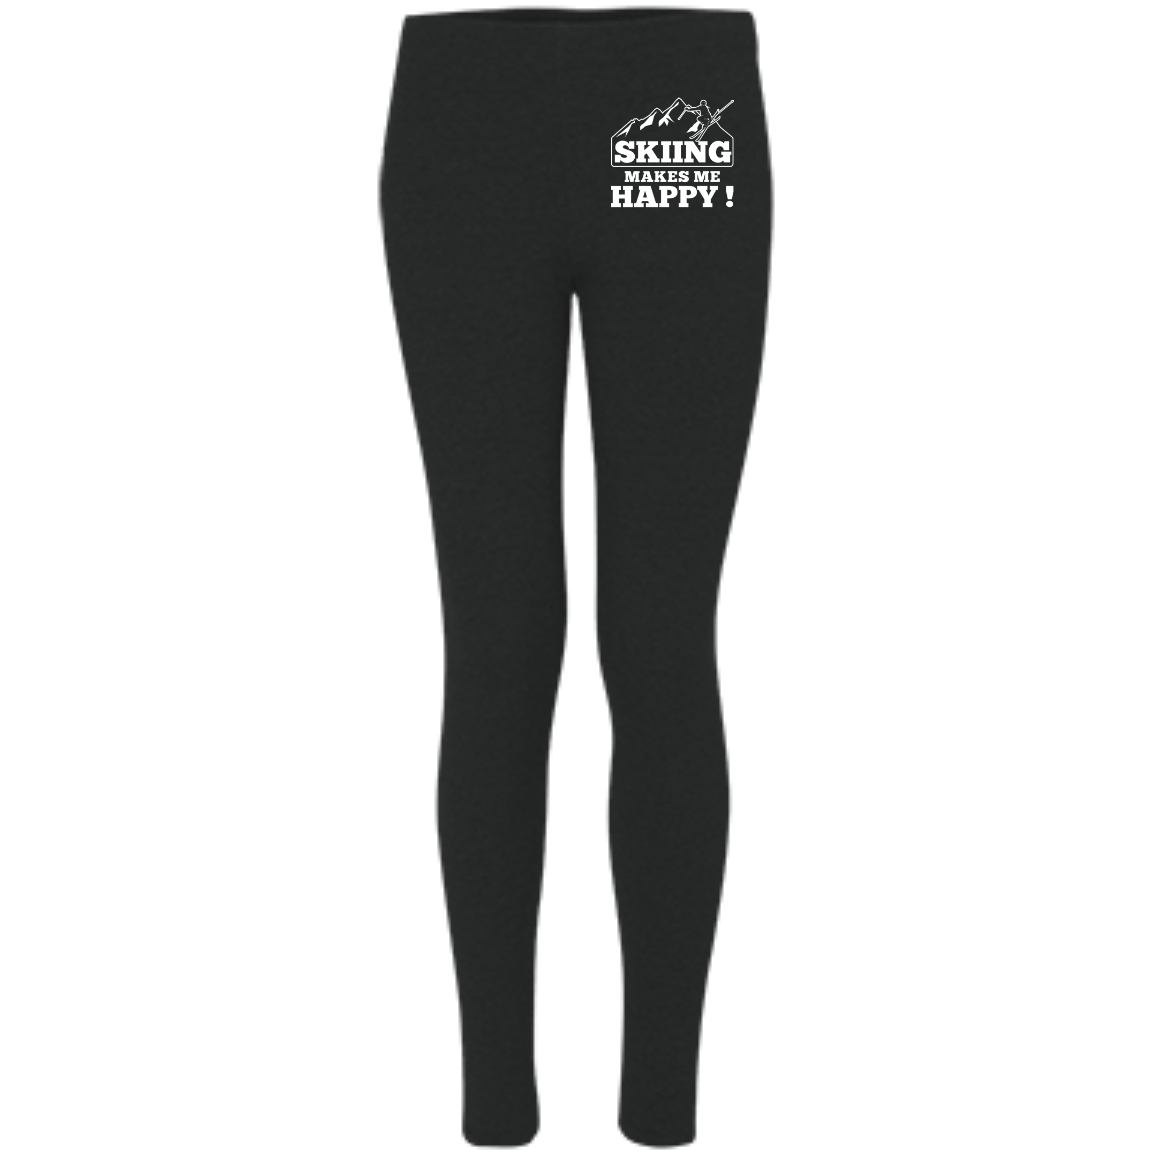 Skiing Makes Me Happy Women's Embroidered Leggings - Powderaddicts